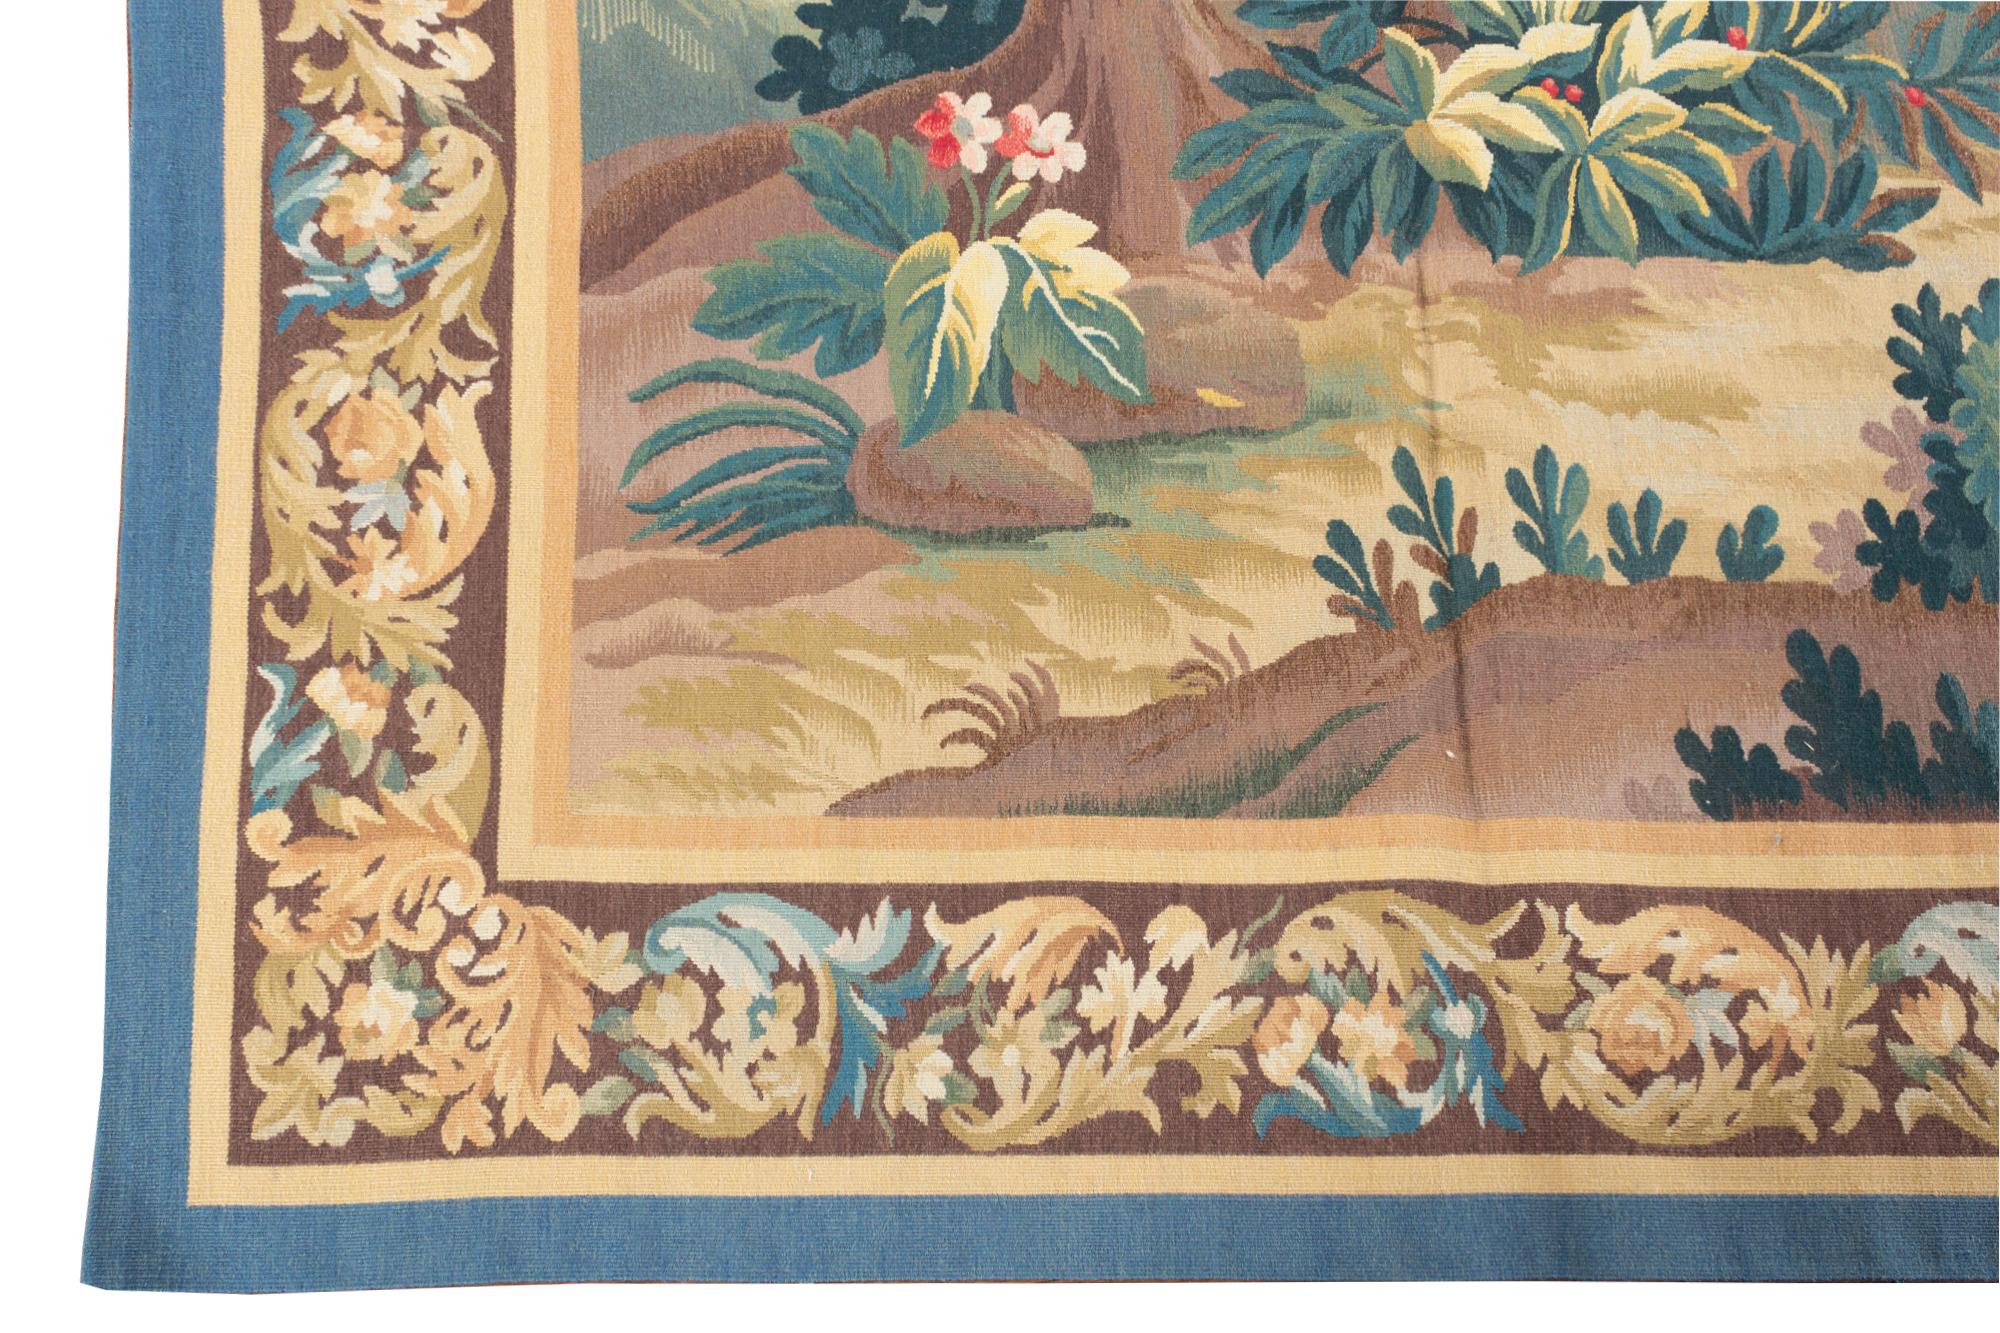 A graceful verdure style tapestry in the style of those woven in the 18th century at Aubusson, one of the chief tapestry weaving towns in 18th century France. This landscape scene is marked by the simple beauty inherent to the 18th century northern